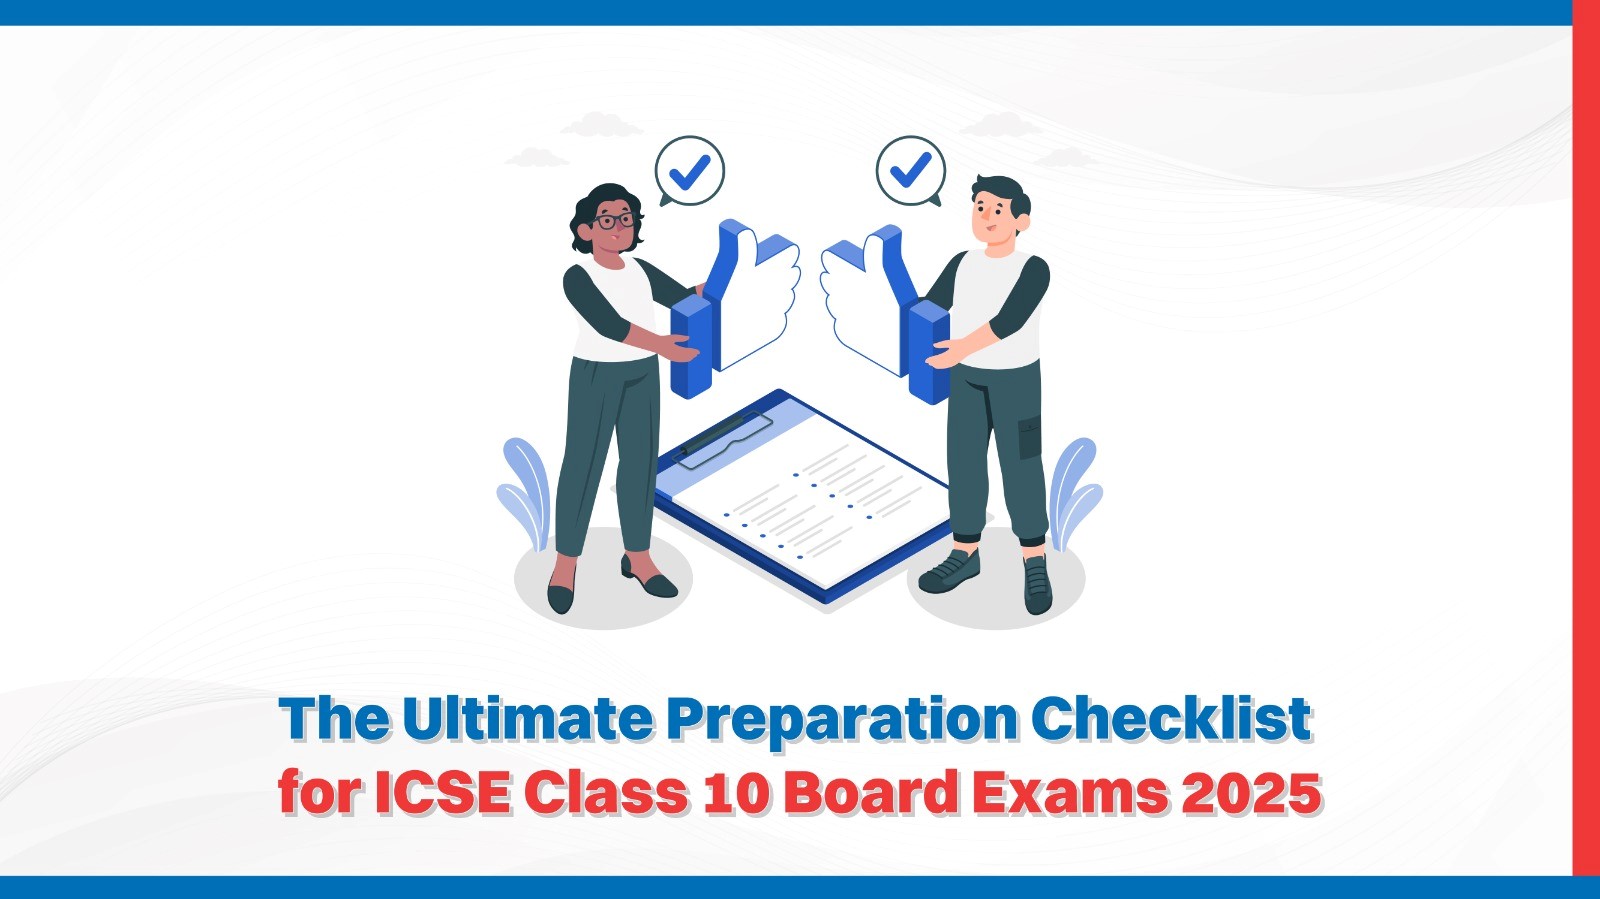 The Ultimate Preparation Checklist for ICSE Class 10 Board Exams 2025.jpg